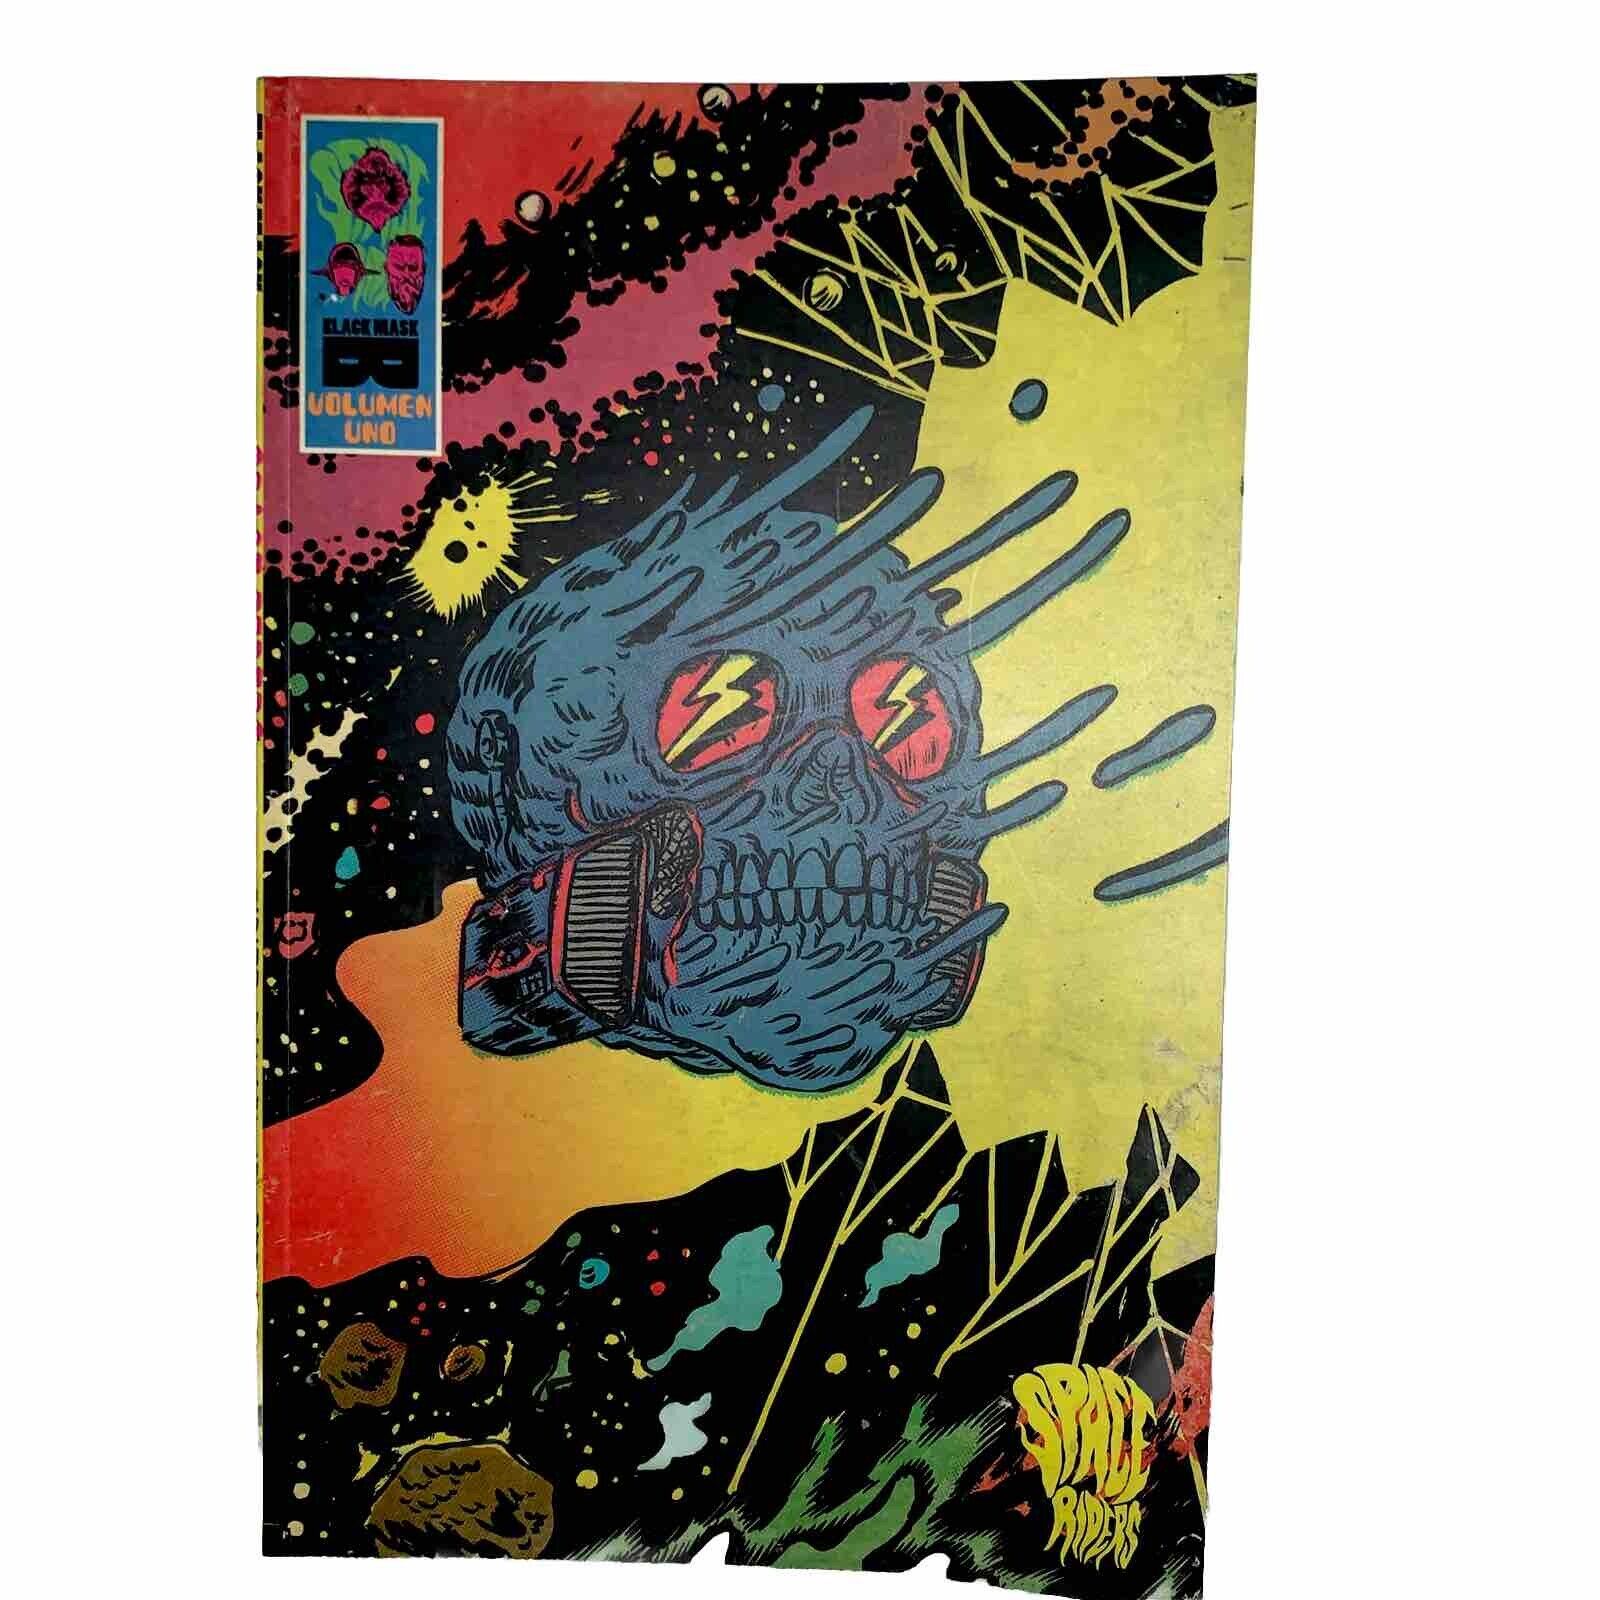 Space Riders #1 Volume Uno Black Mask Studios, 2015) Perfect But No Shrink Wrap